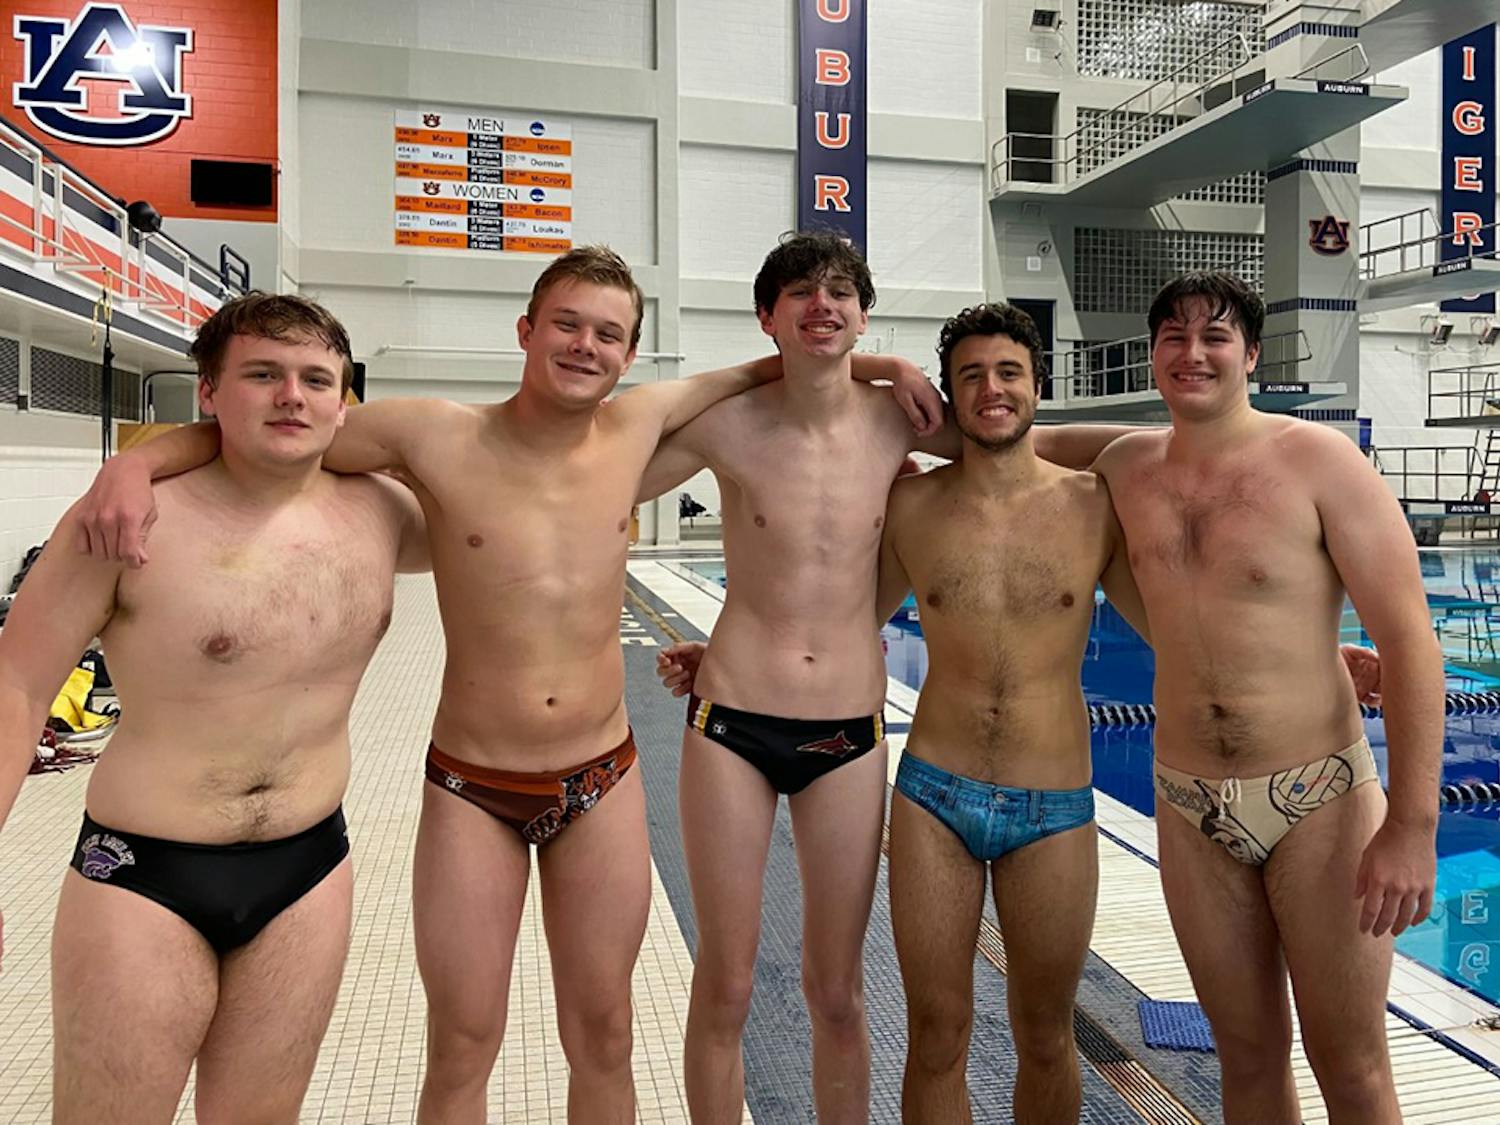 The Gamecock Water Polo Club at Auburn University for the Chris Young Tournament on Jan 29, 2022.